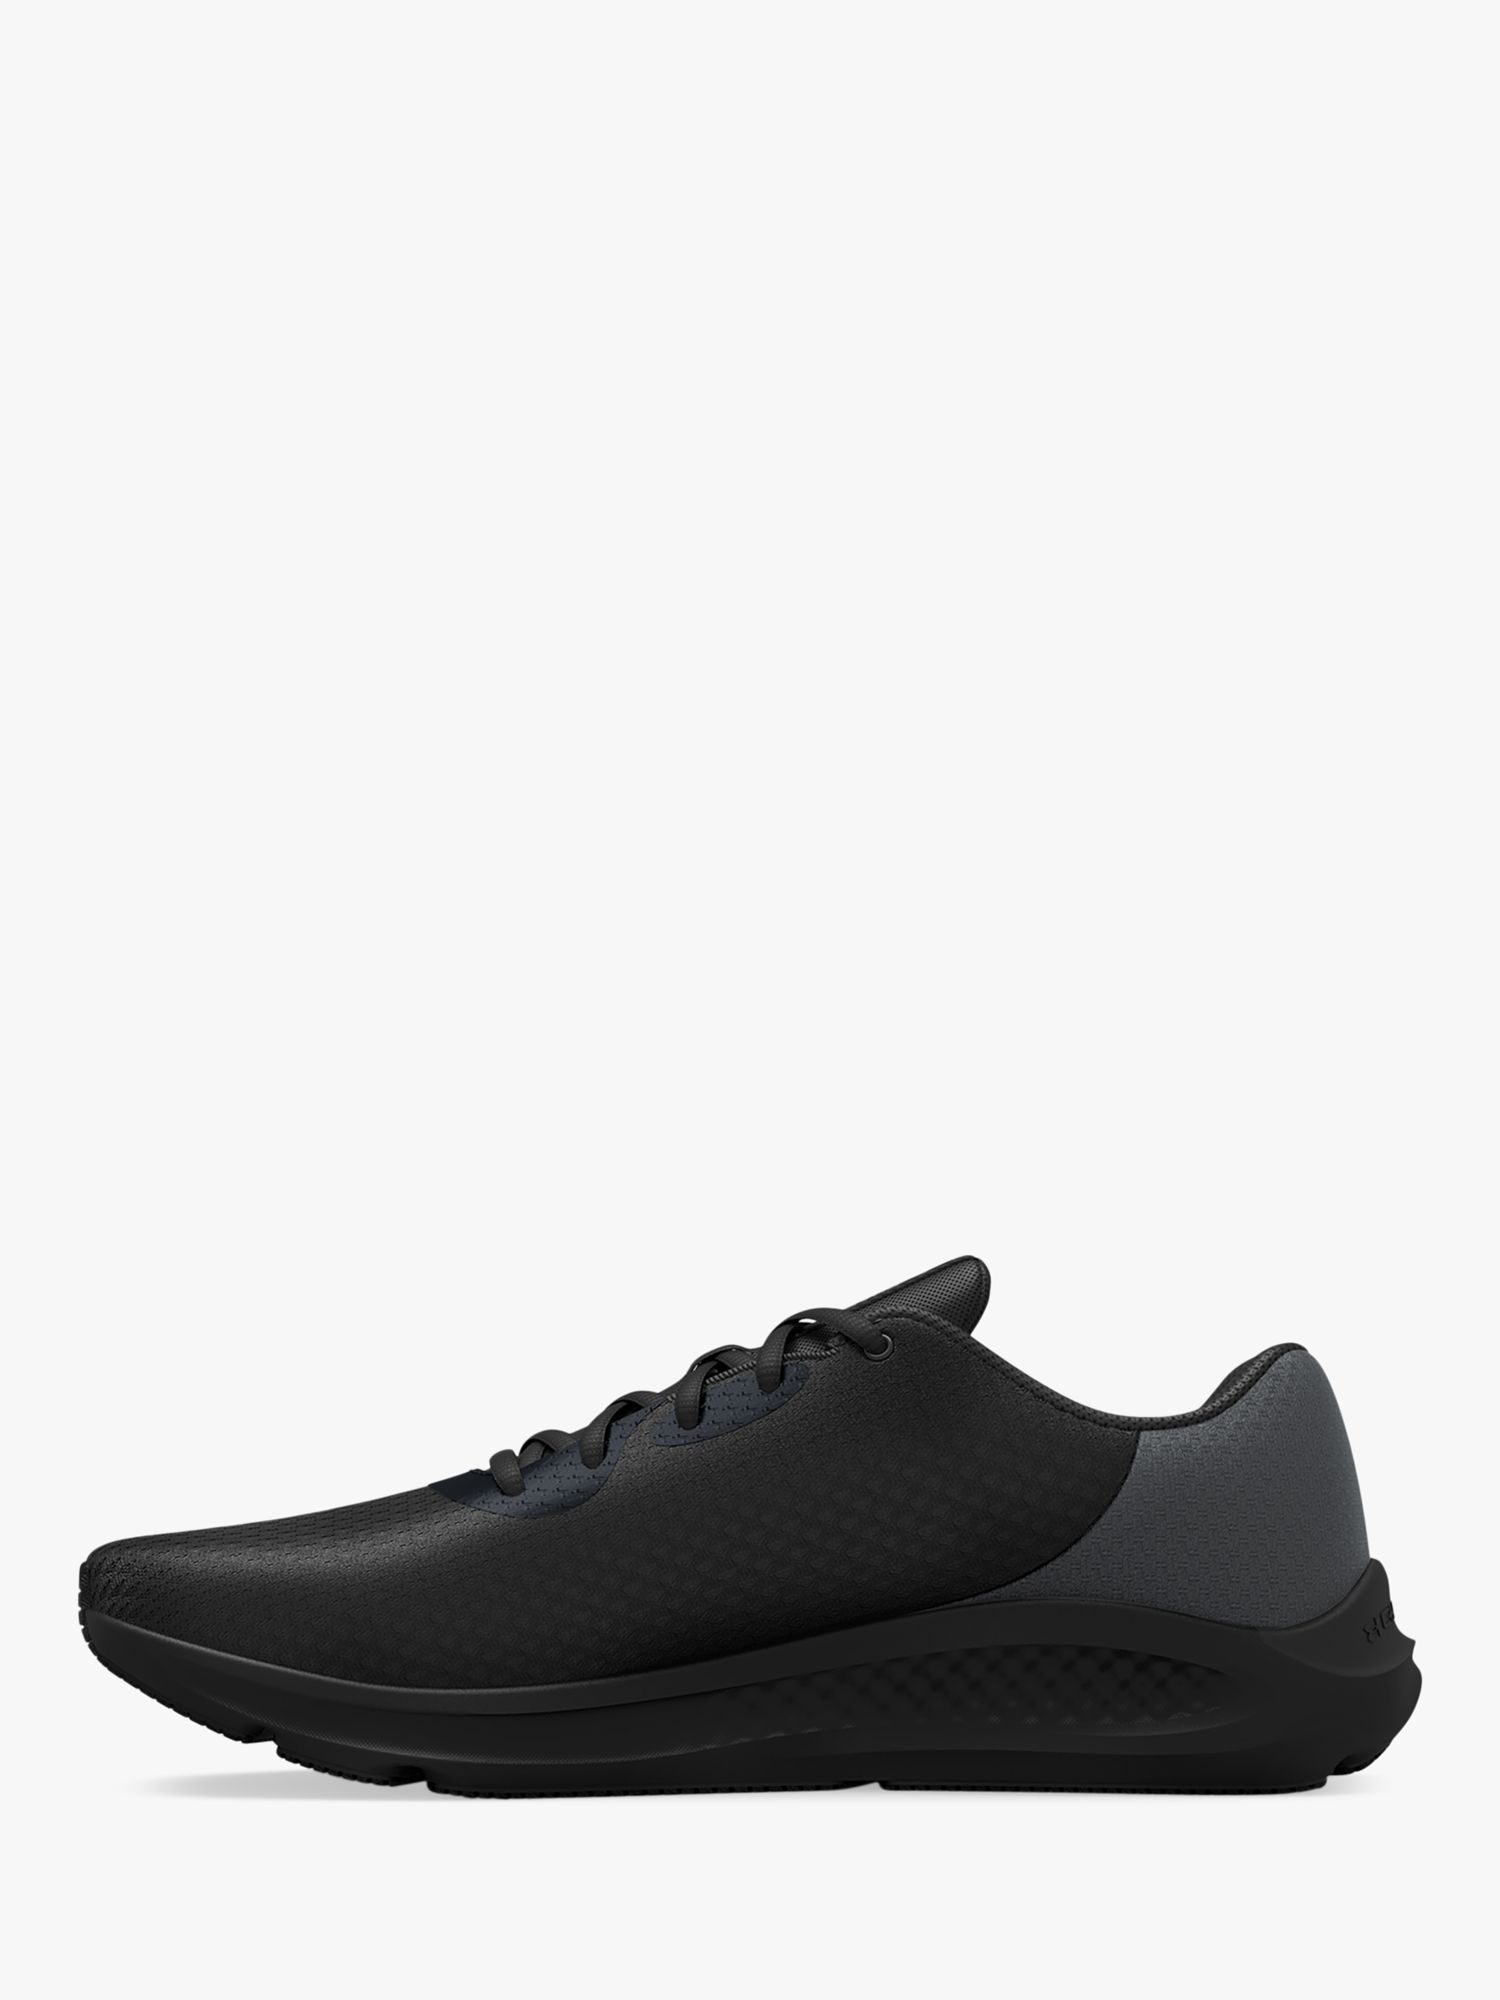 Under Armour Charged Pursuit 3 Men's Running Shoes, Black/Black